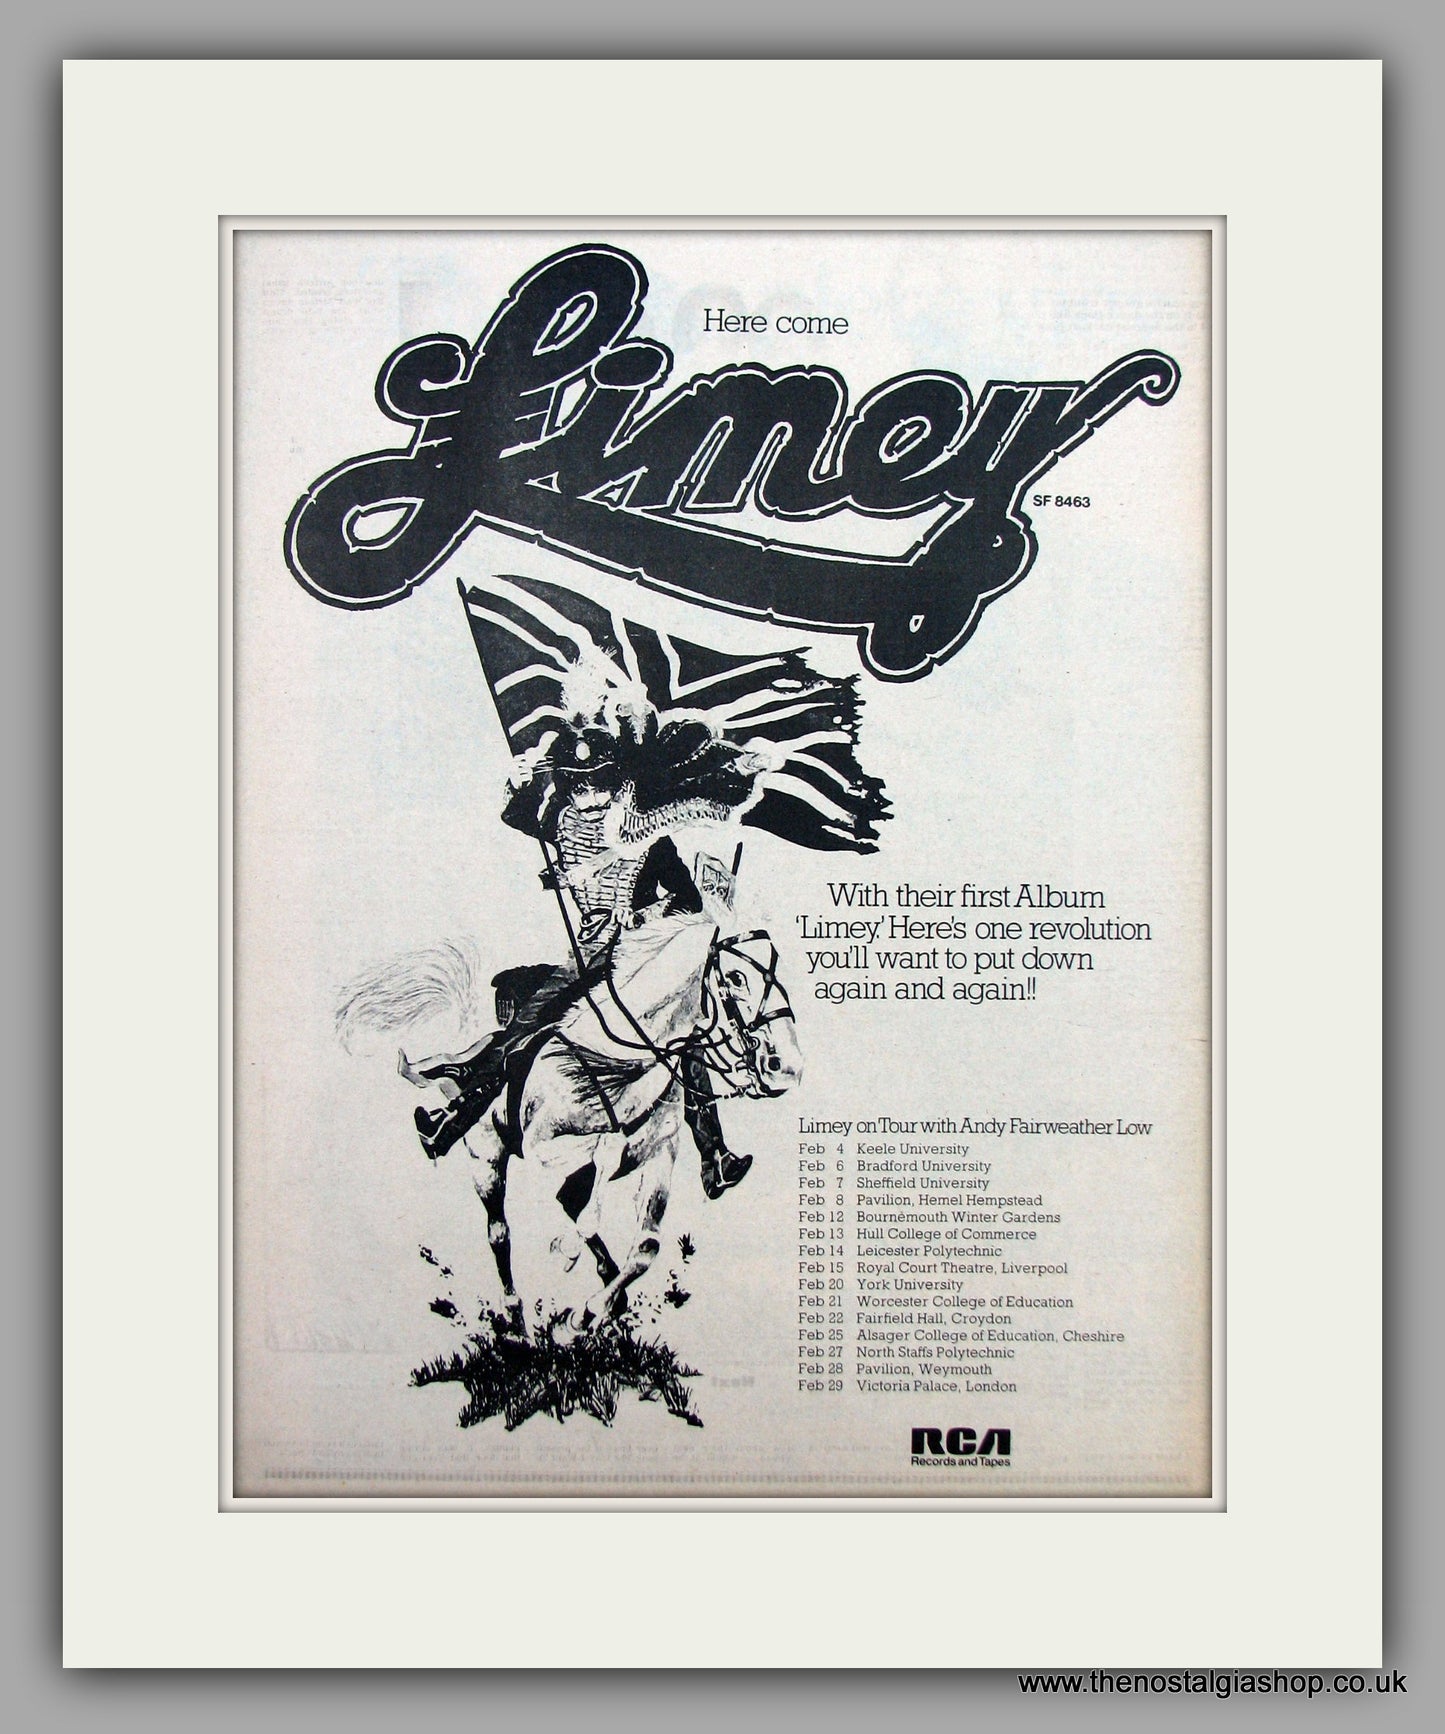 Limey On Tour With Andy Fairweather Low.  Original Vintage Advert 1976 (ref AD10491)